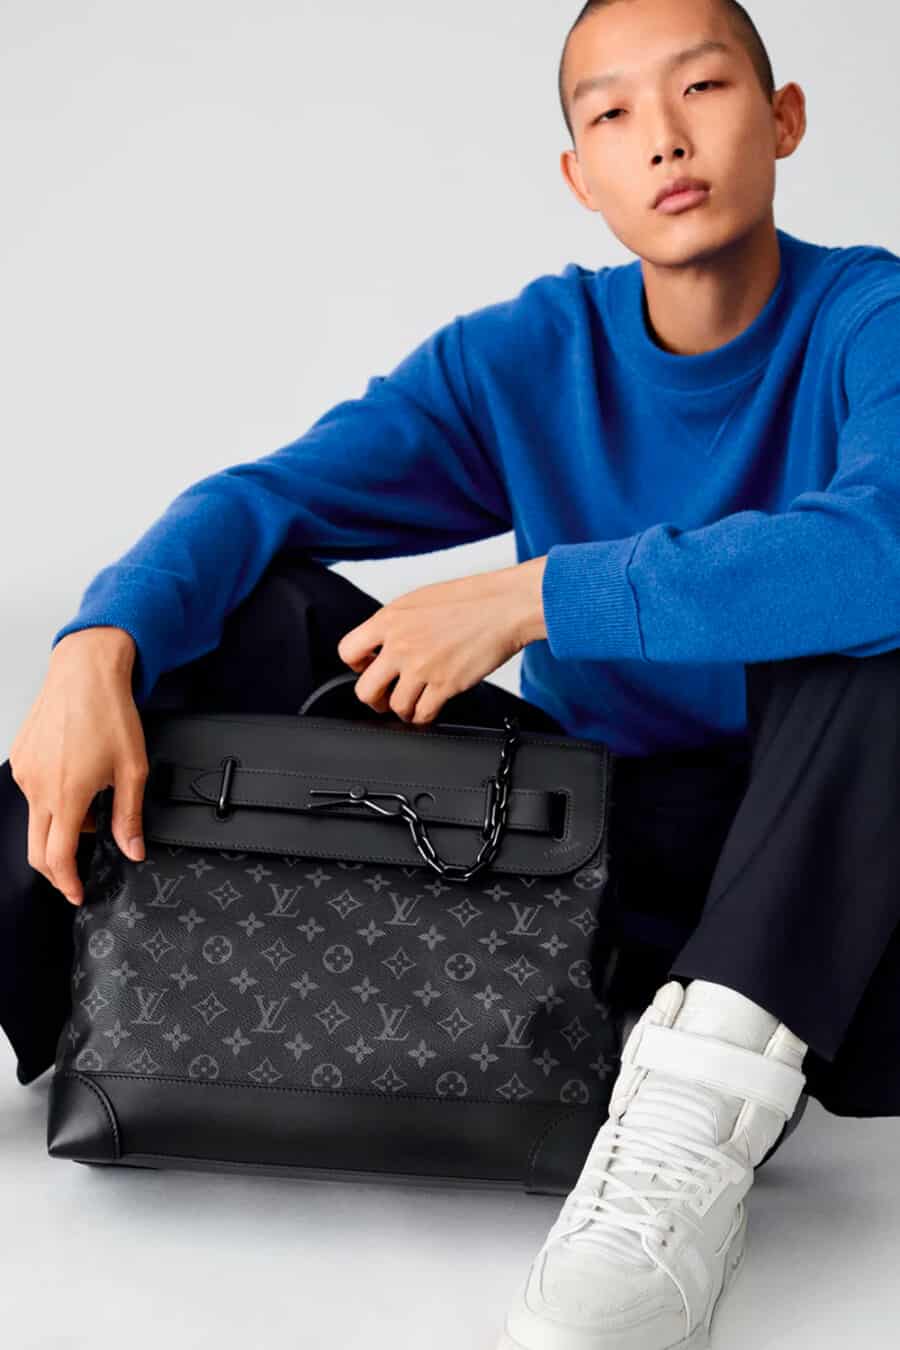 Asian Model Xu Meen modelling for a Louis Vuitton campaign